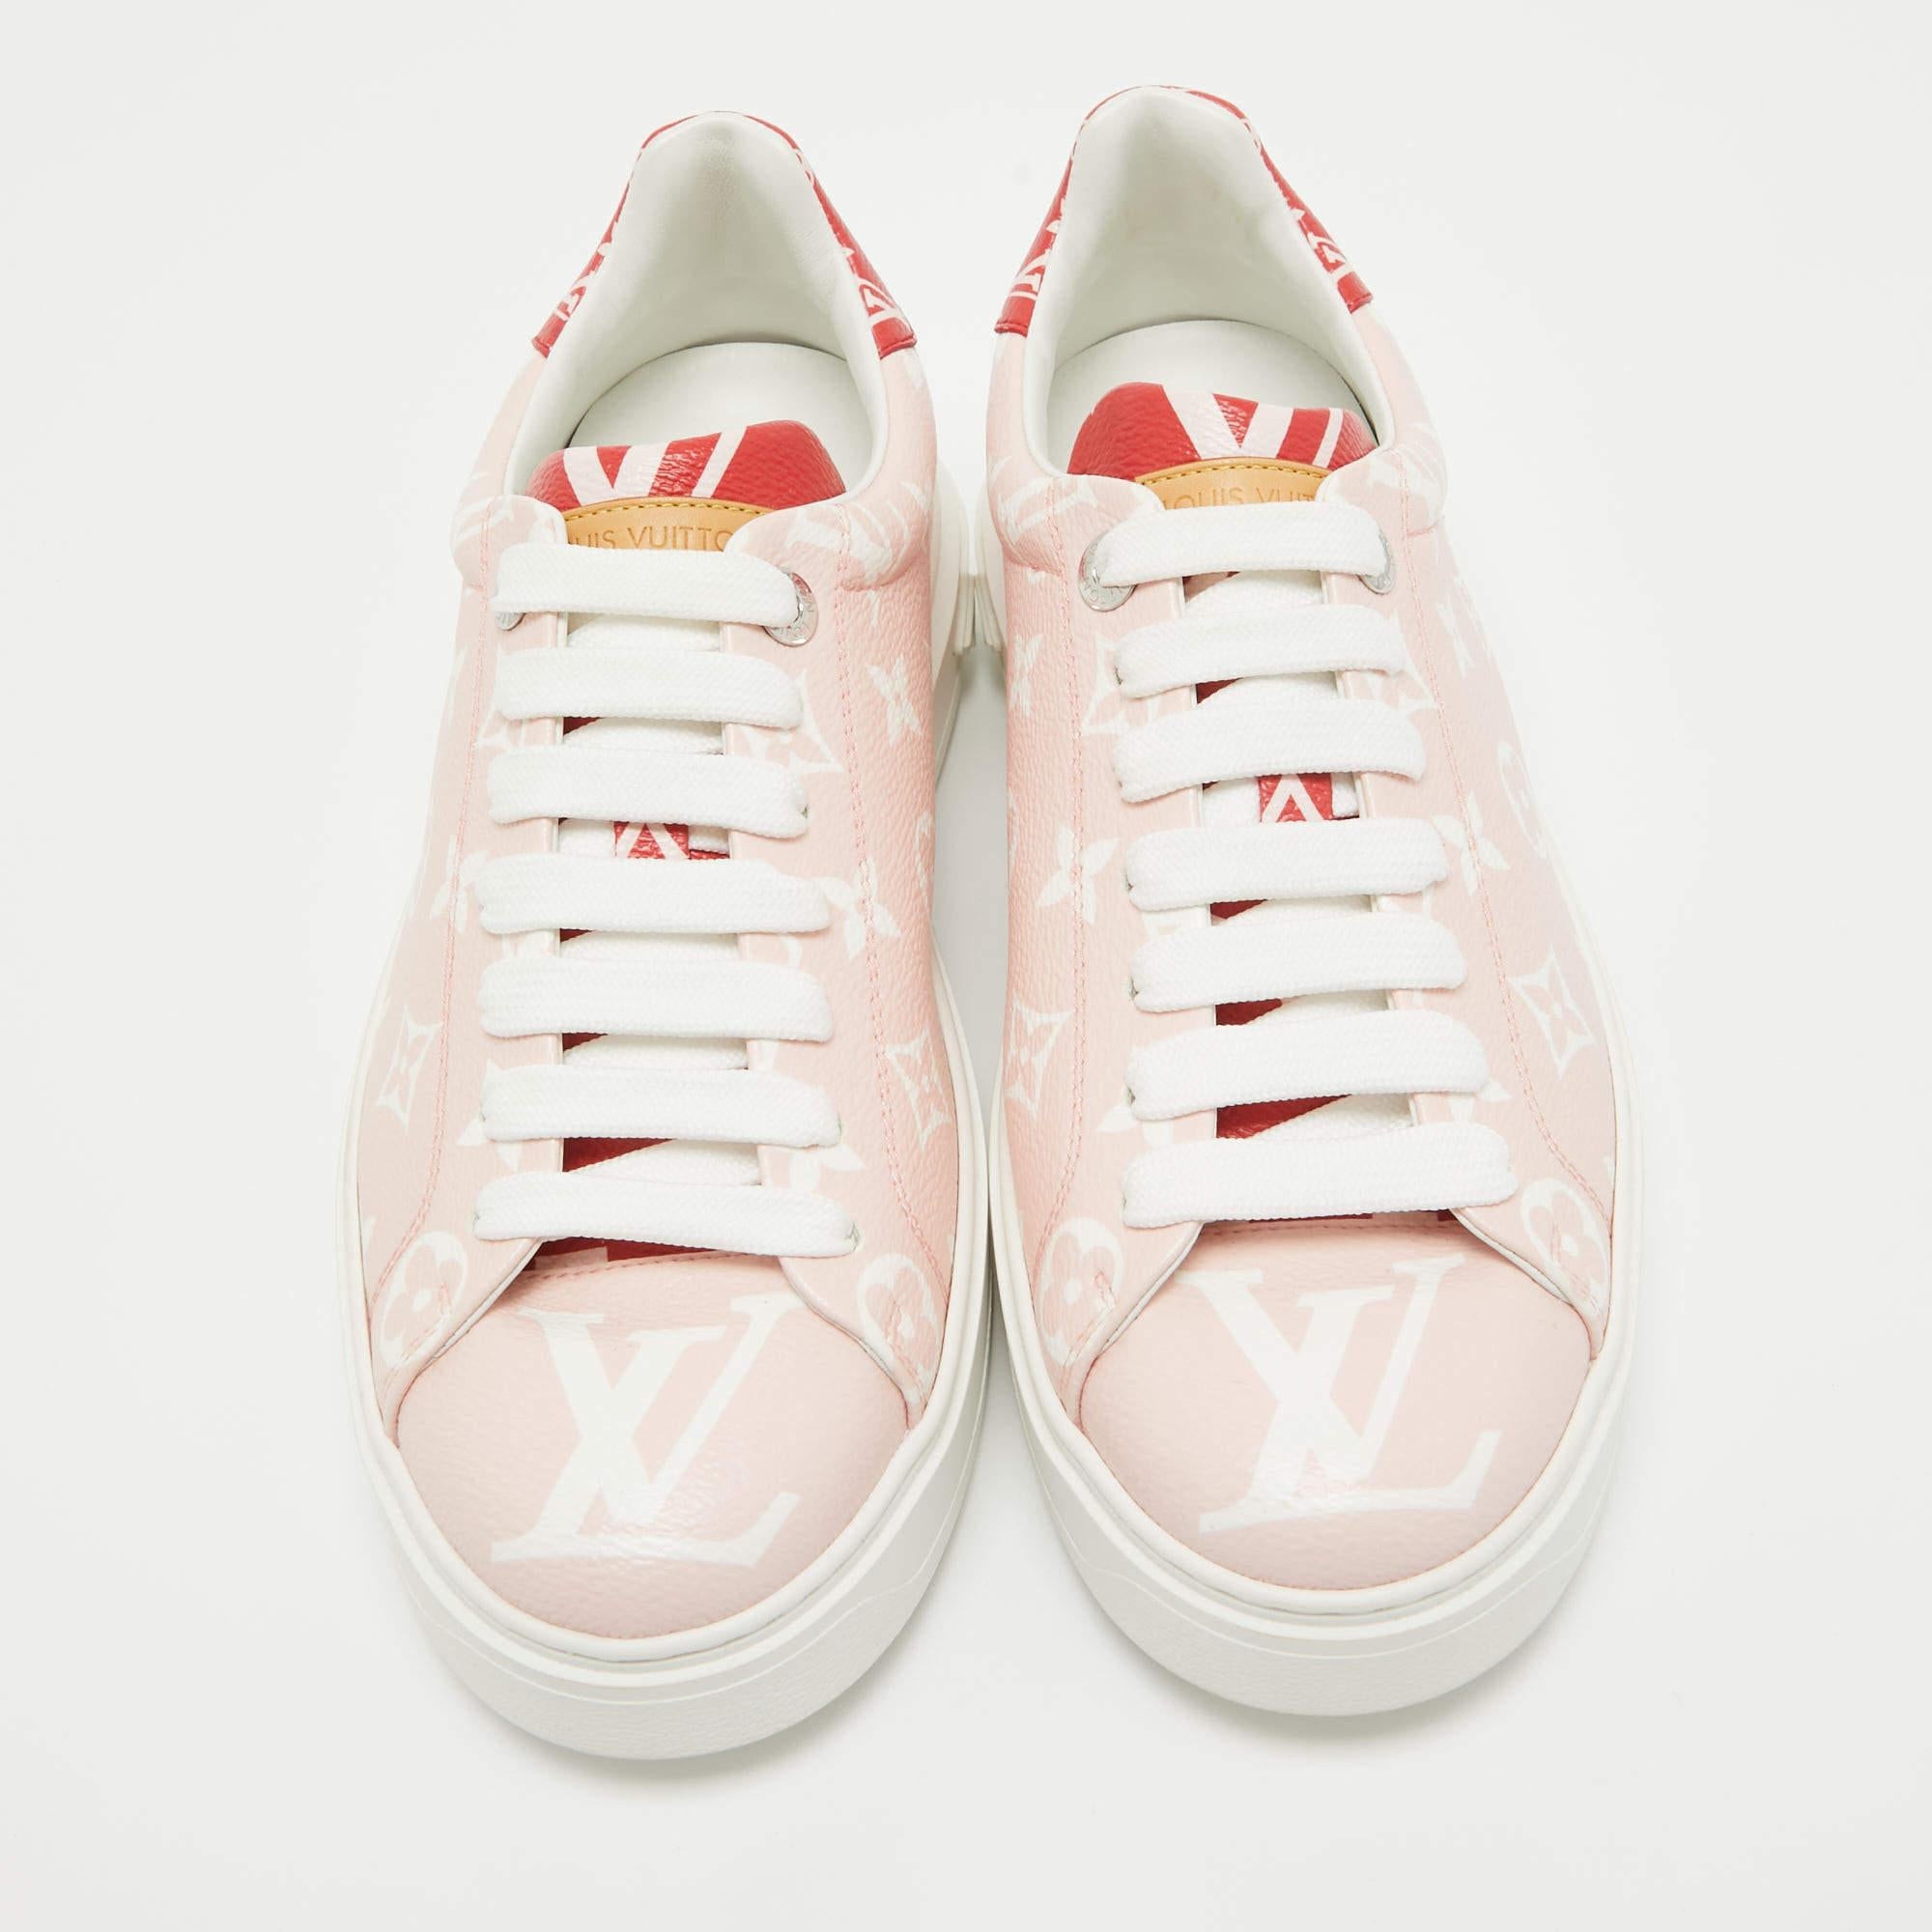 Louis Vuitton Pink Monogram Canvas Time Out Sneakers Size 40 1